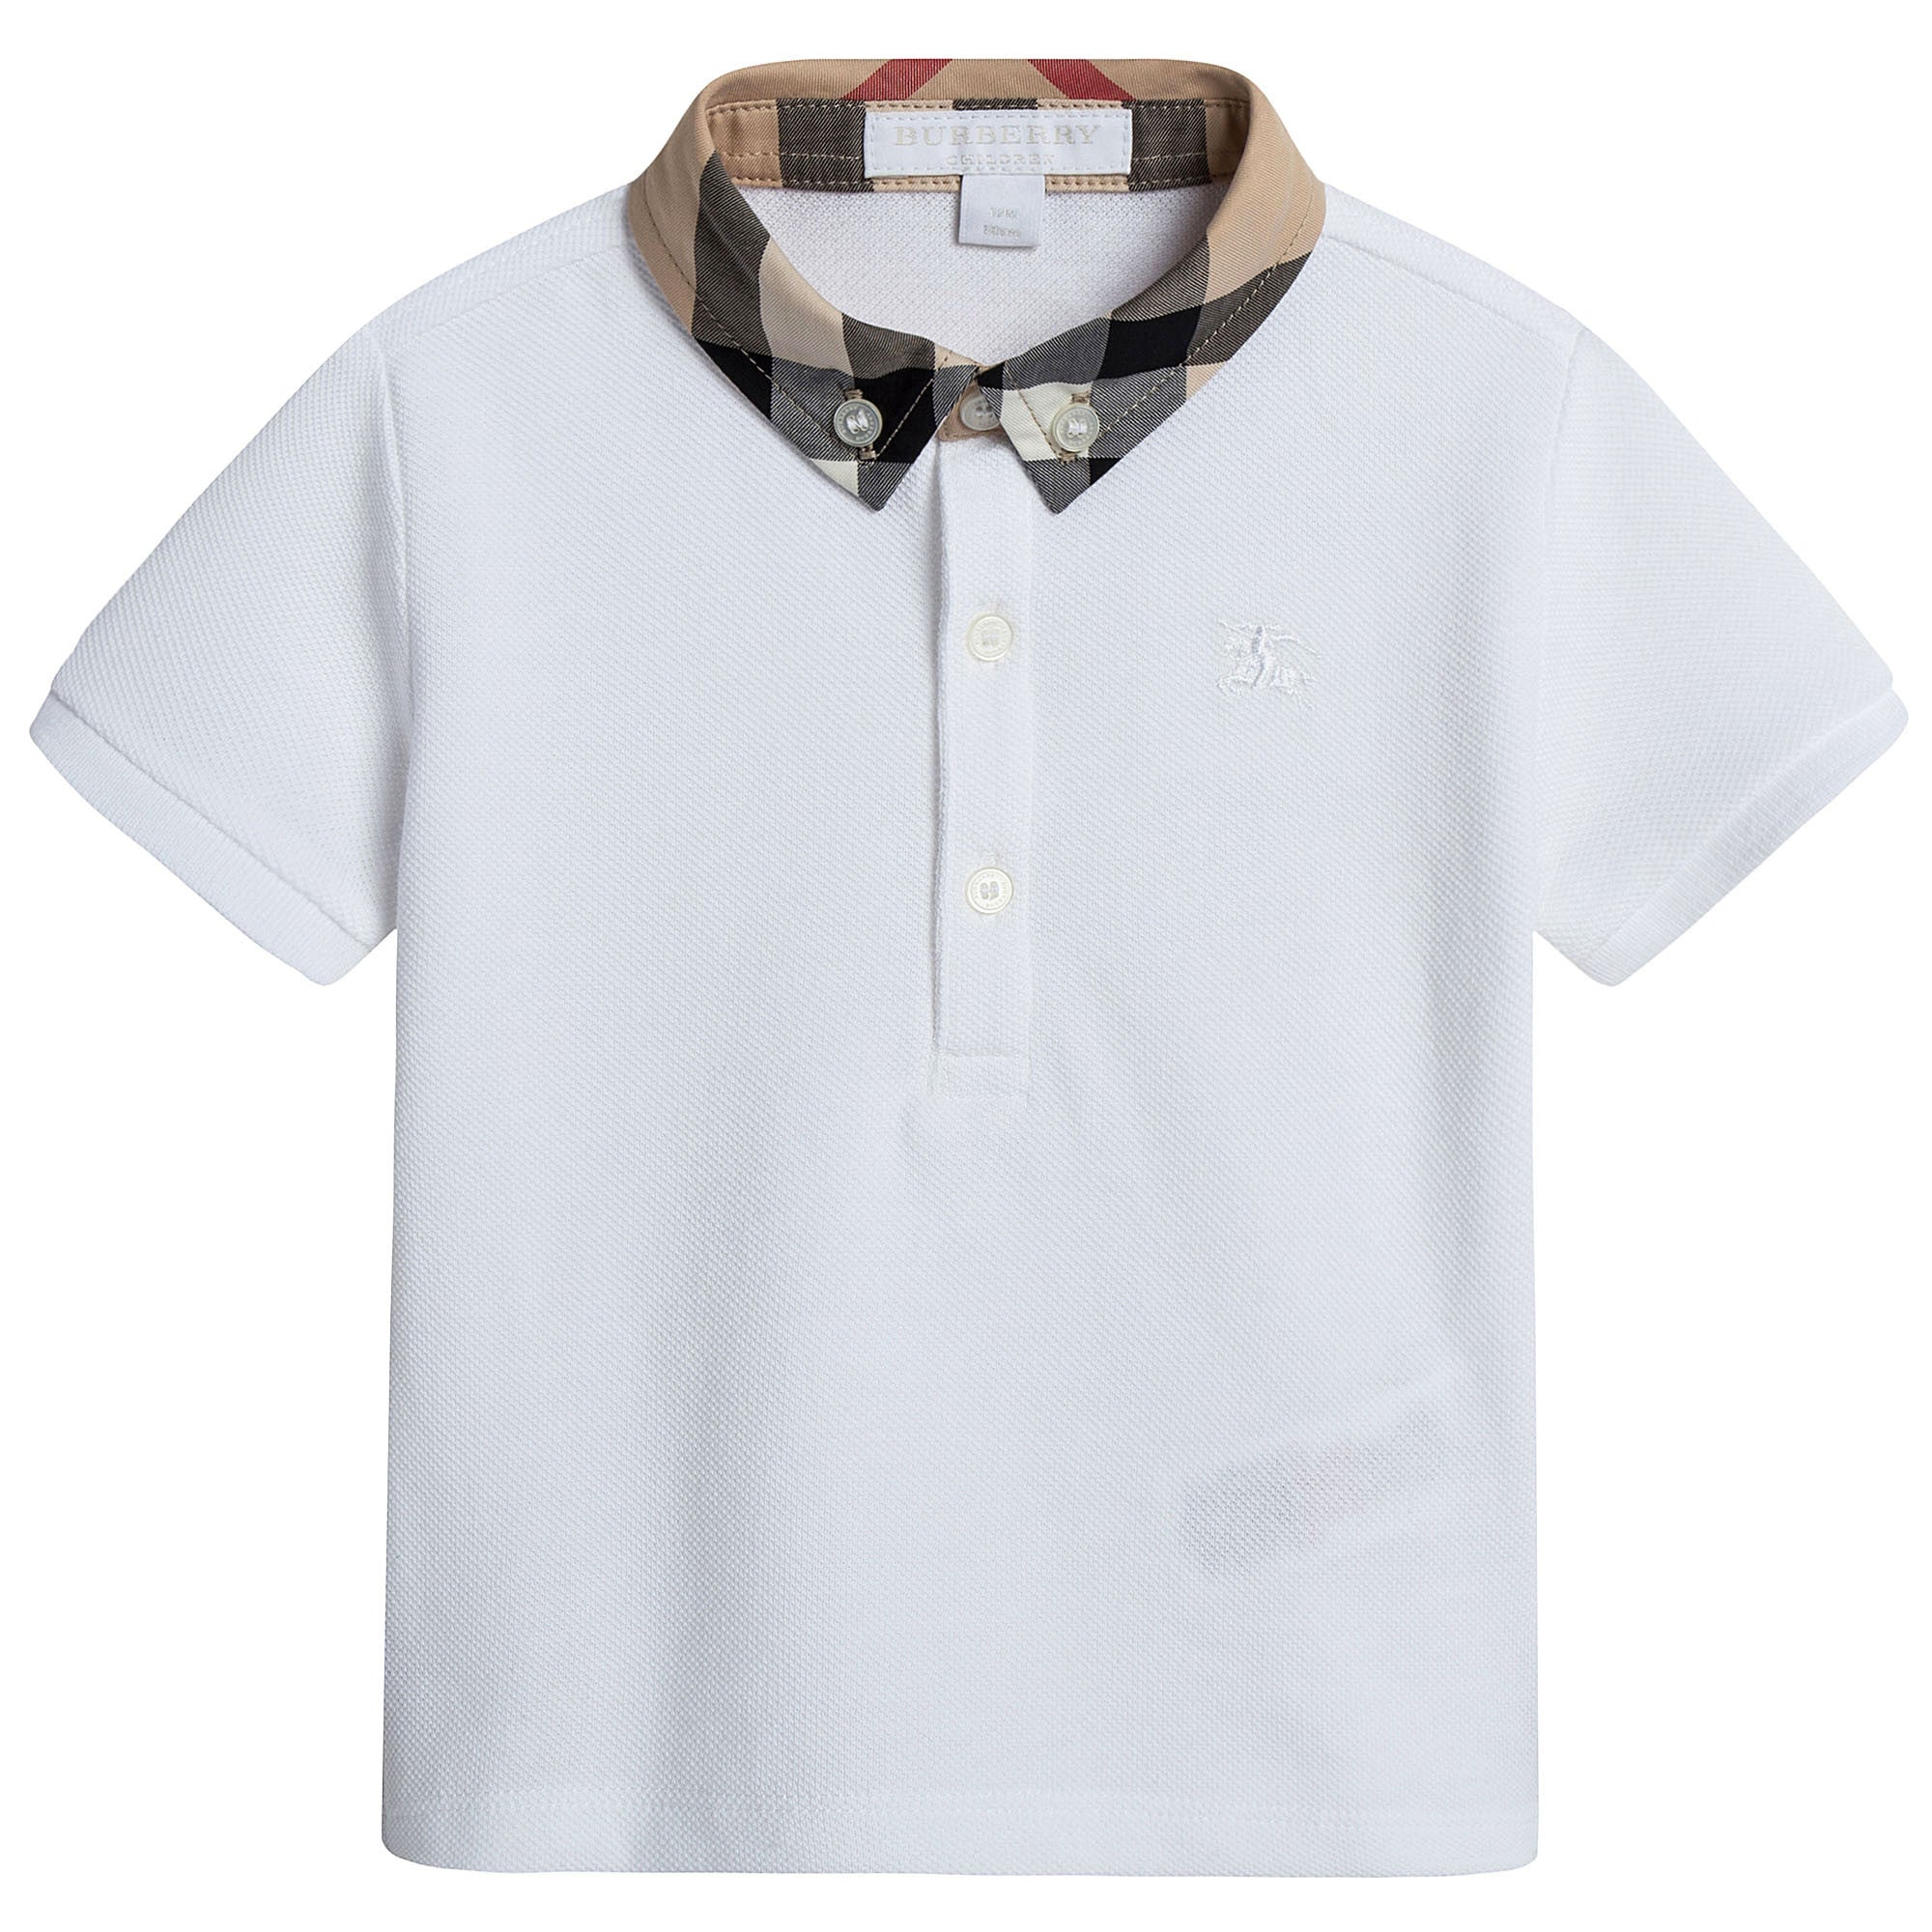 Baby Boys White Polo Shirt With Checked Collar - CÉMAROSE | Children's Fashion Store - 1